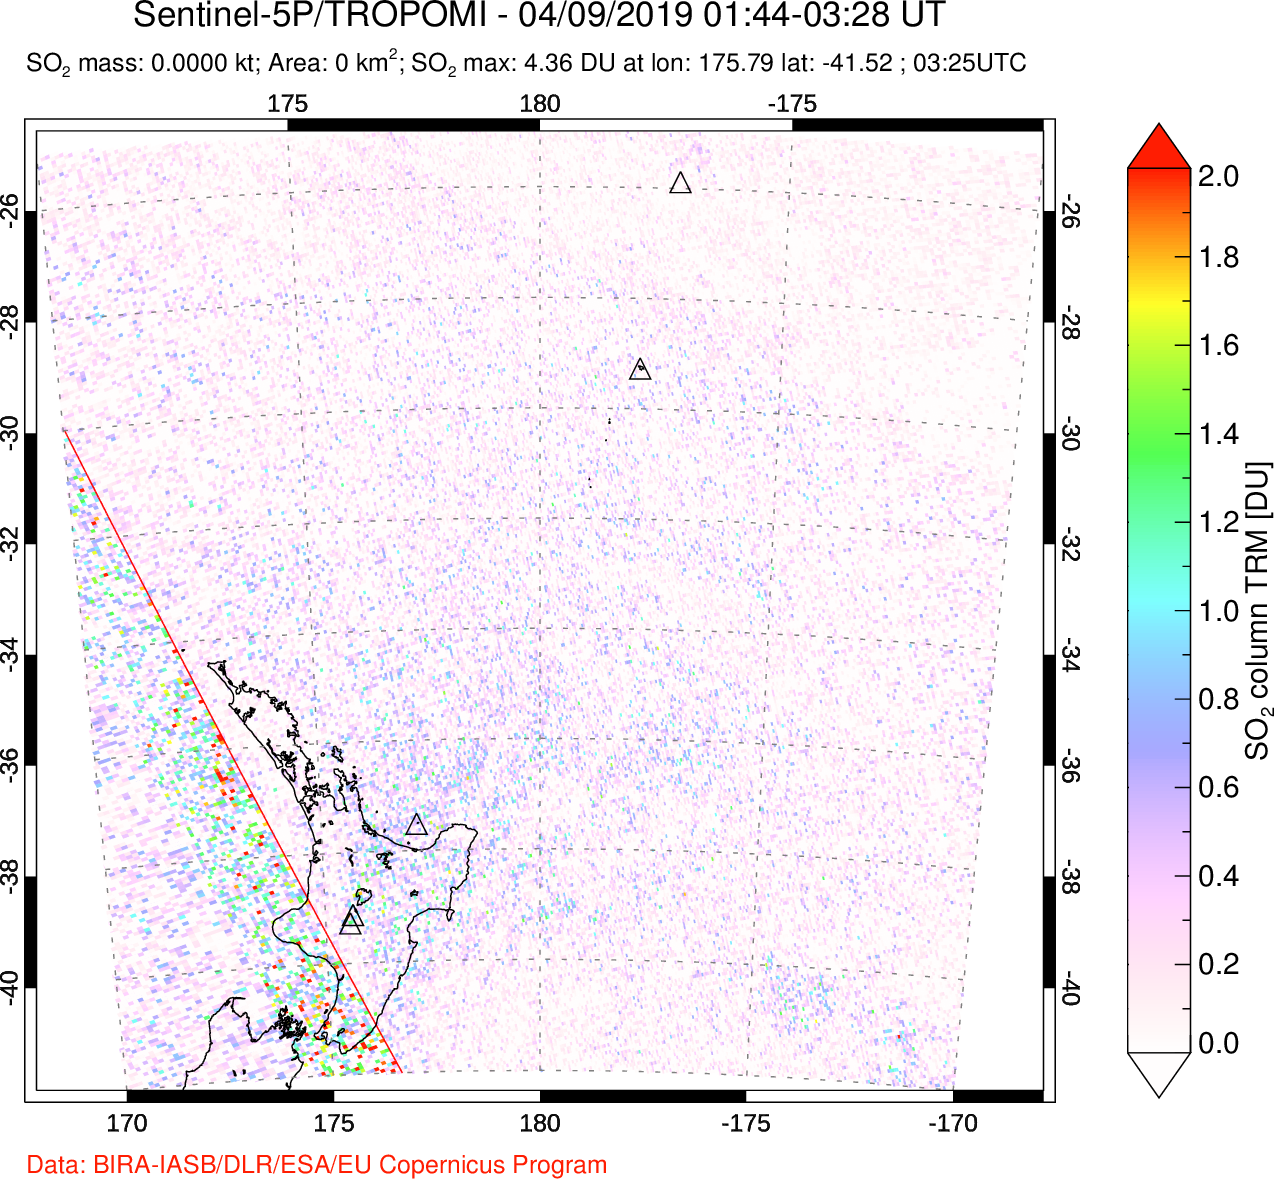 A sulfur dioxide image over New Zealand on Apr 09, 2019.